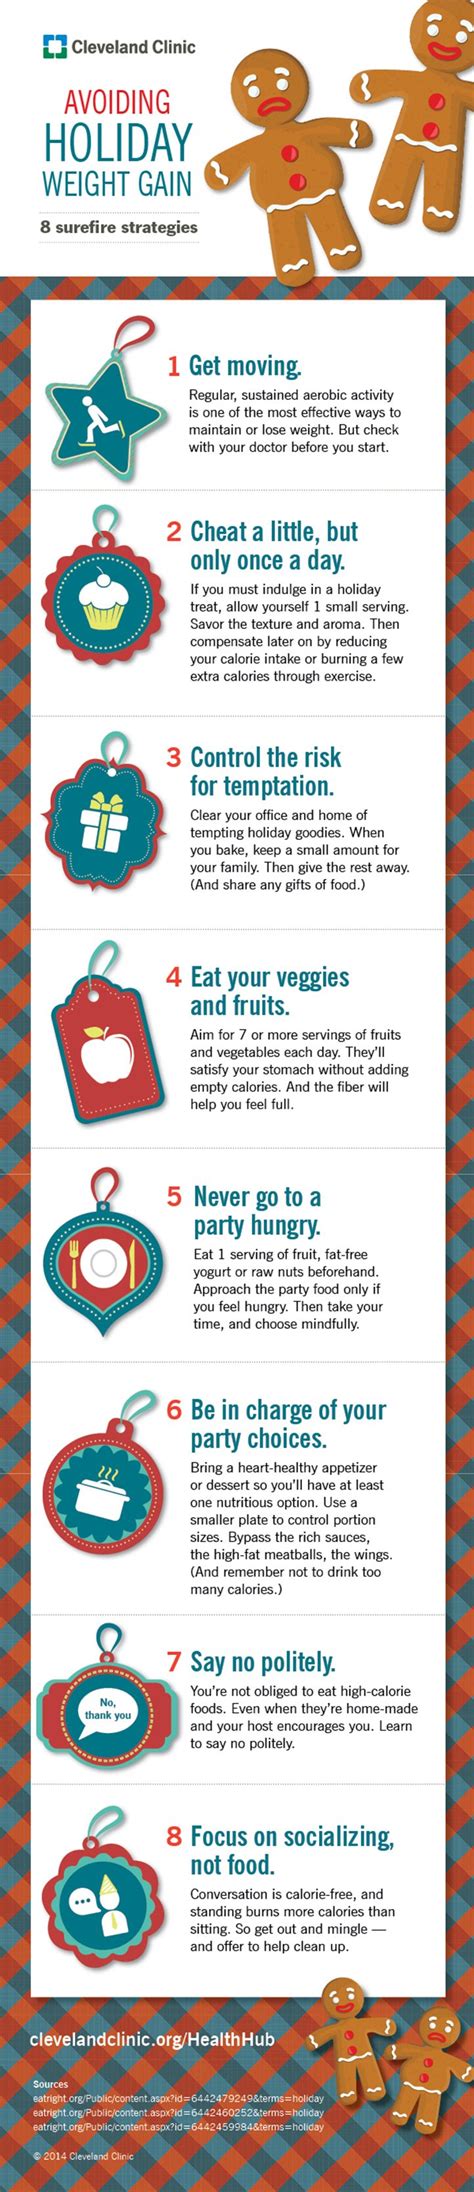 8 ways to stay slim during the holidays everyday health